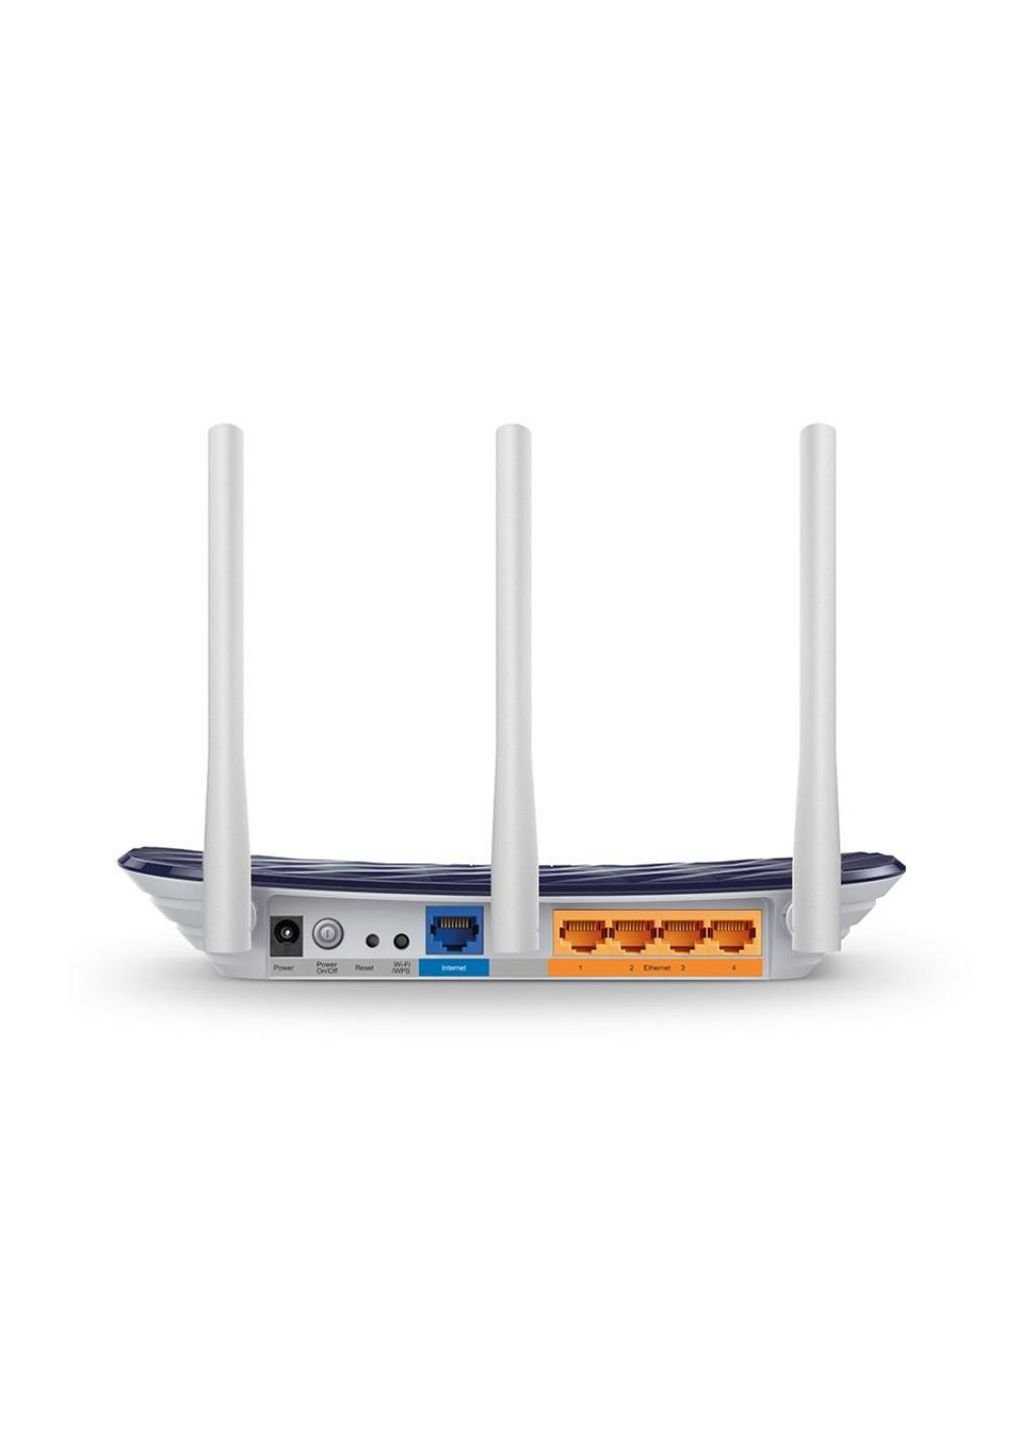 Маршрутизатор Archer C20 (Archer-C20) TP-Link (250095678)